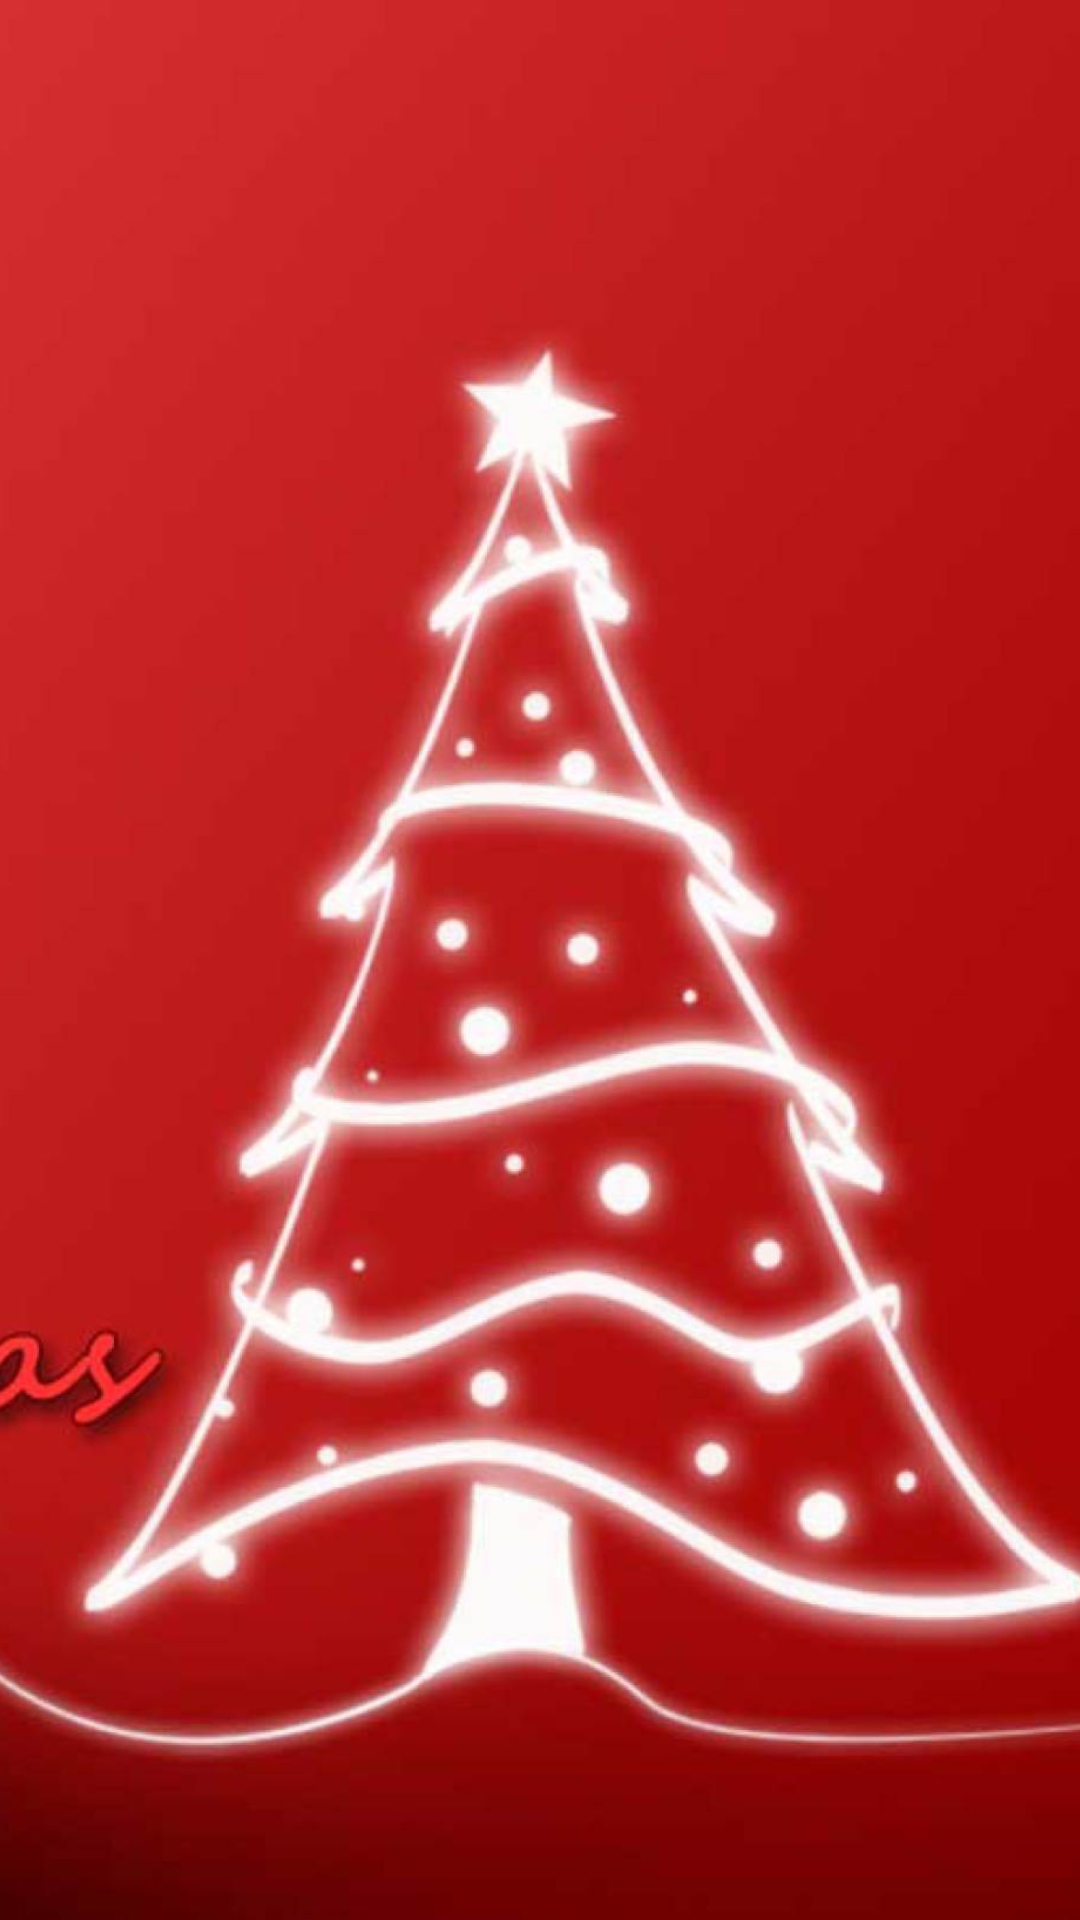 Das Christmas Red And White Tree Wallpaper 1080x1920